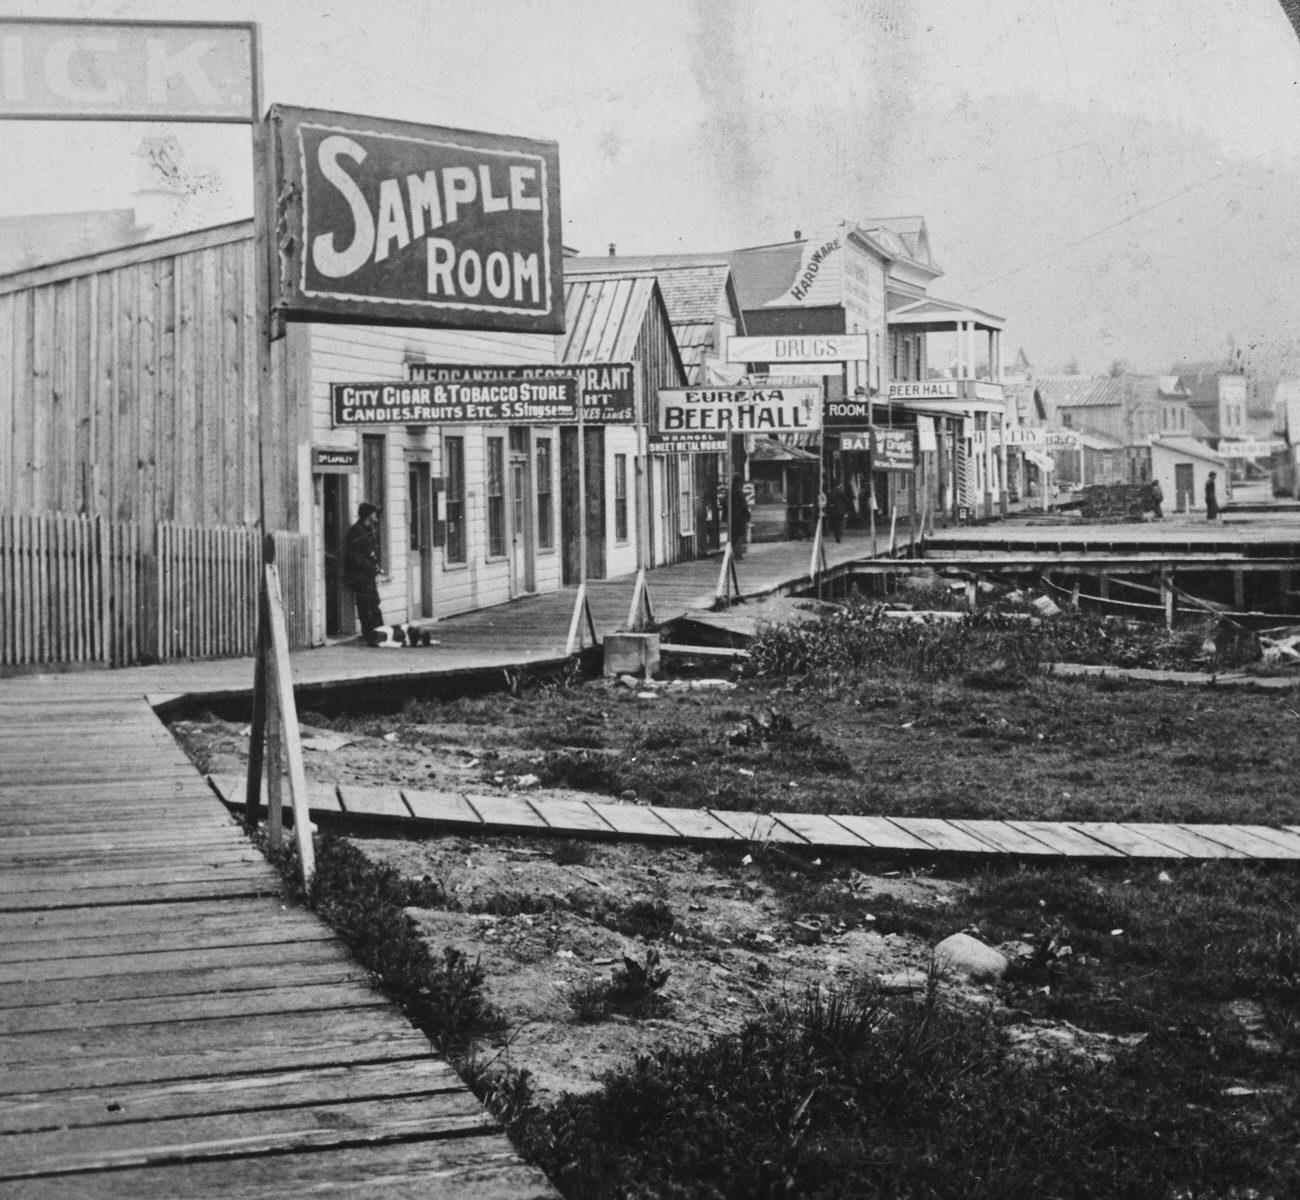 Main Street in Wrangell, Alaska, famous for saloons and totem poles, during the Klondike Gold Rush, circa 1900.